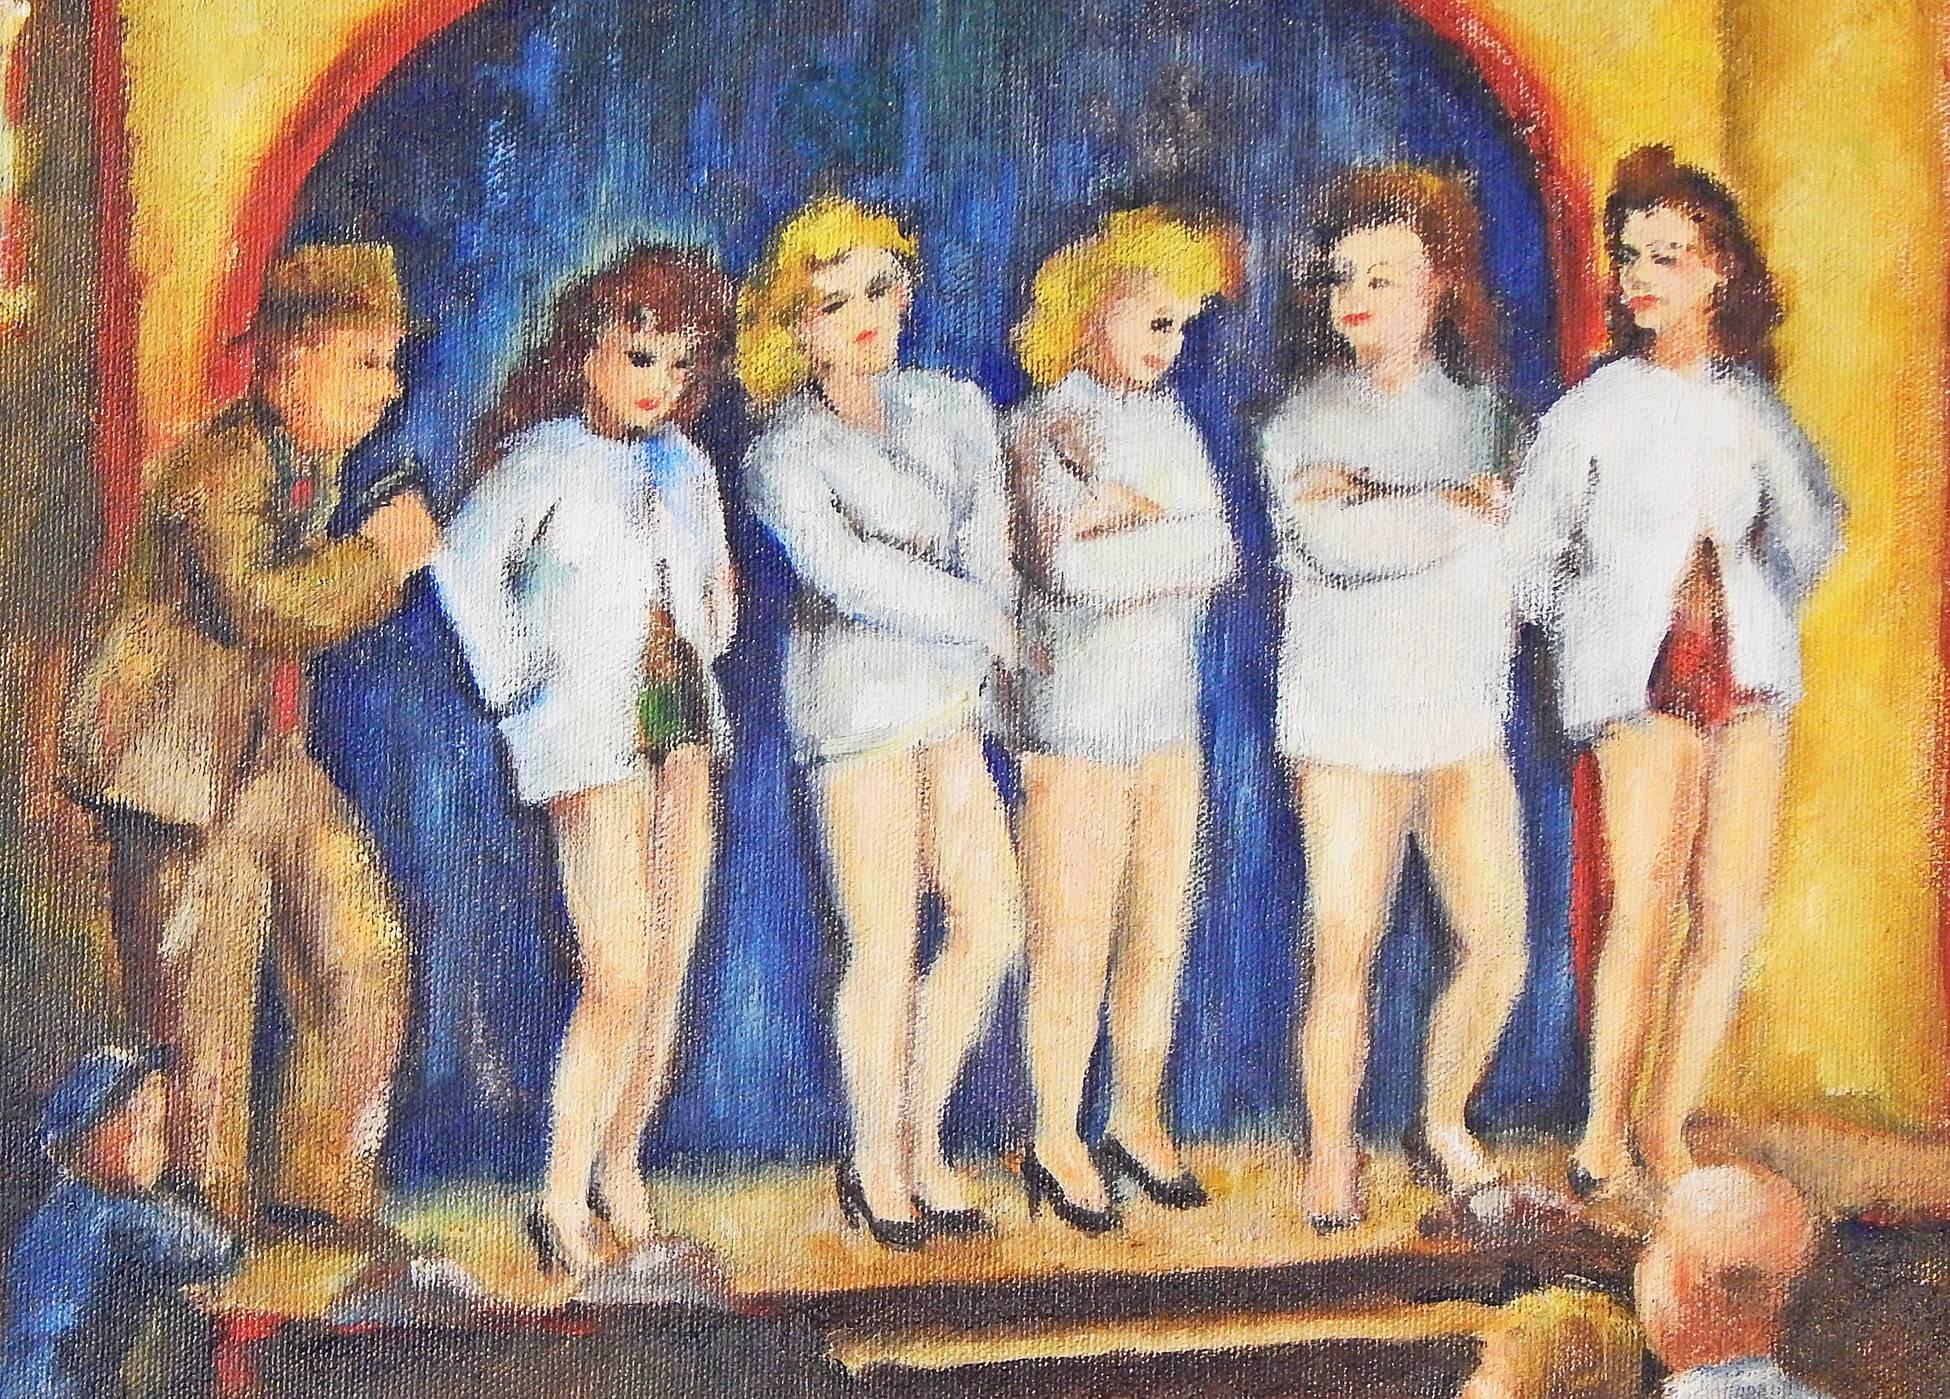 Brimming over with life and energy and vividly painted in tones of deep blue, bright yellow, tangerine and grassy green, this depiction of a small town carnival -- complete with a beauty pageant, ticket booth, parents with children, and colorful